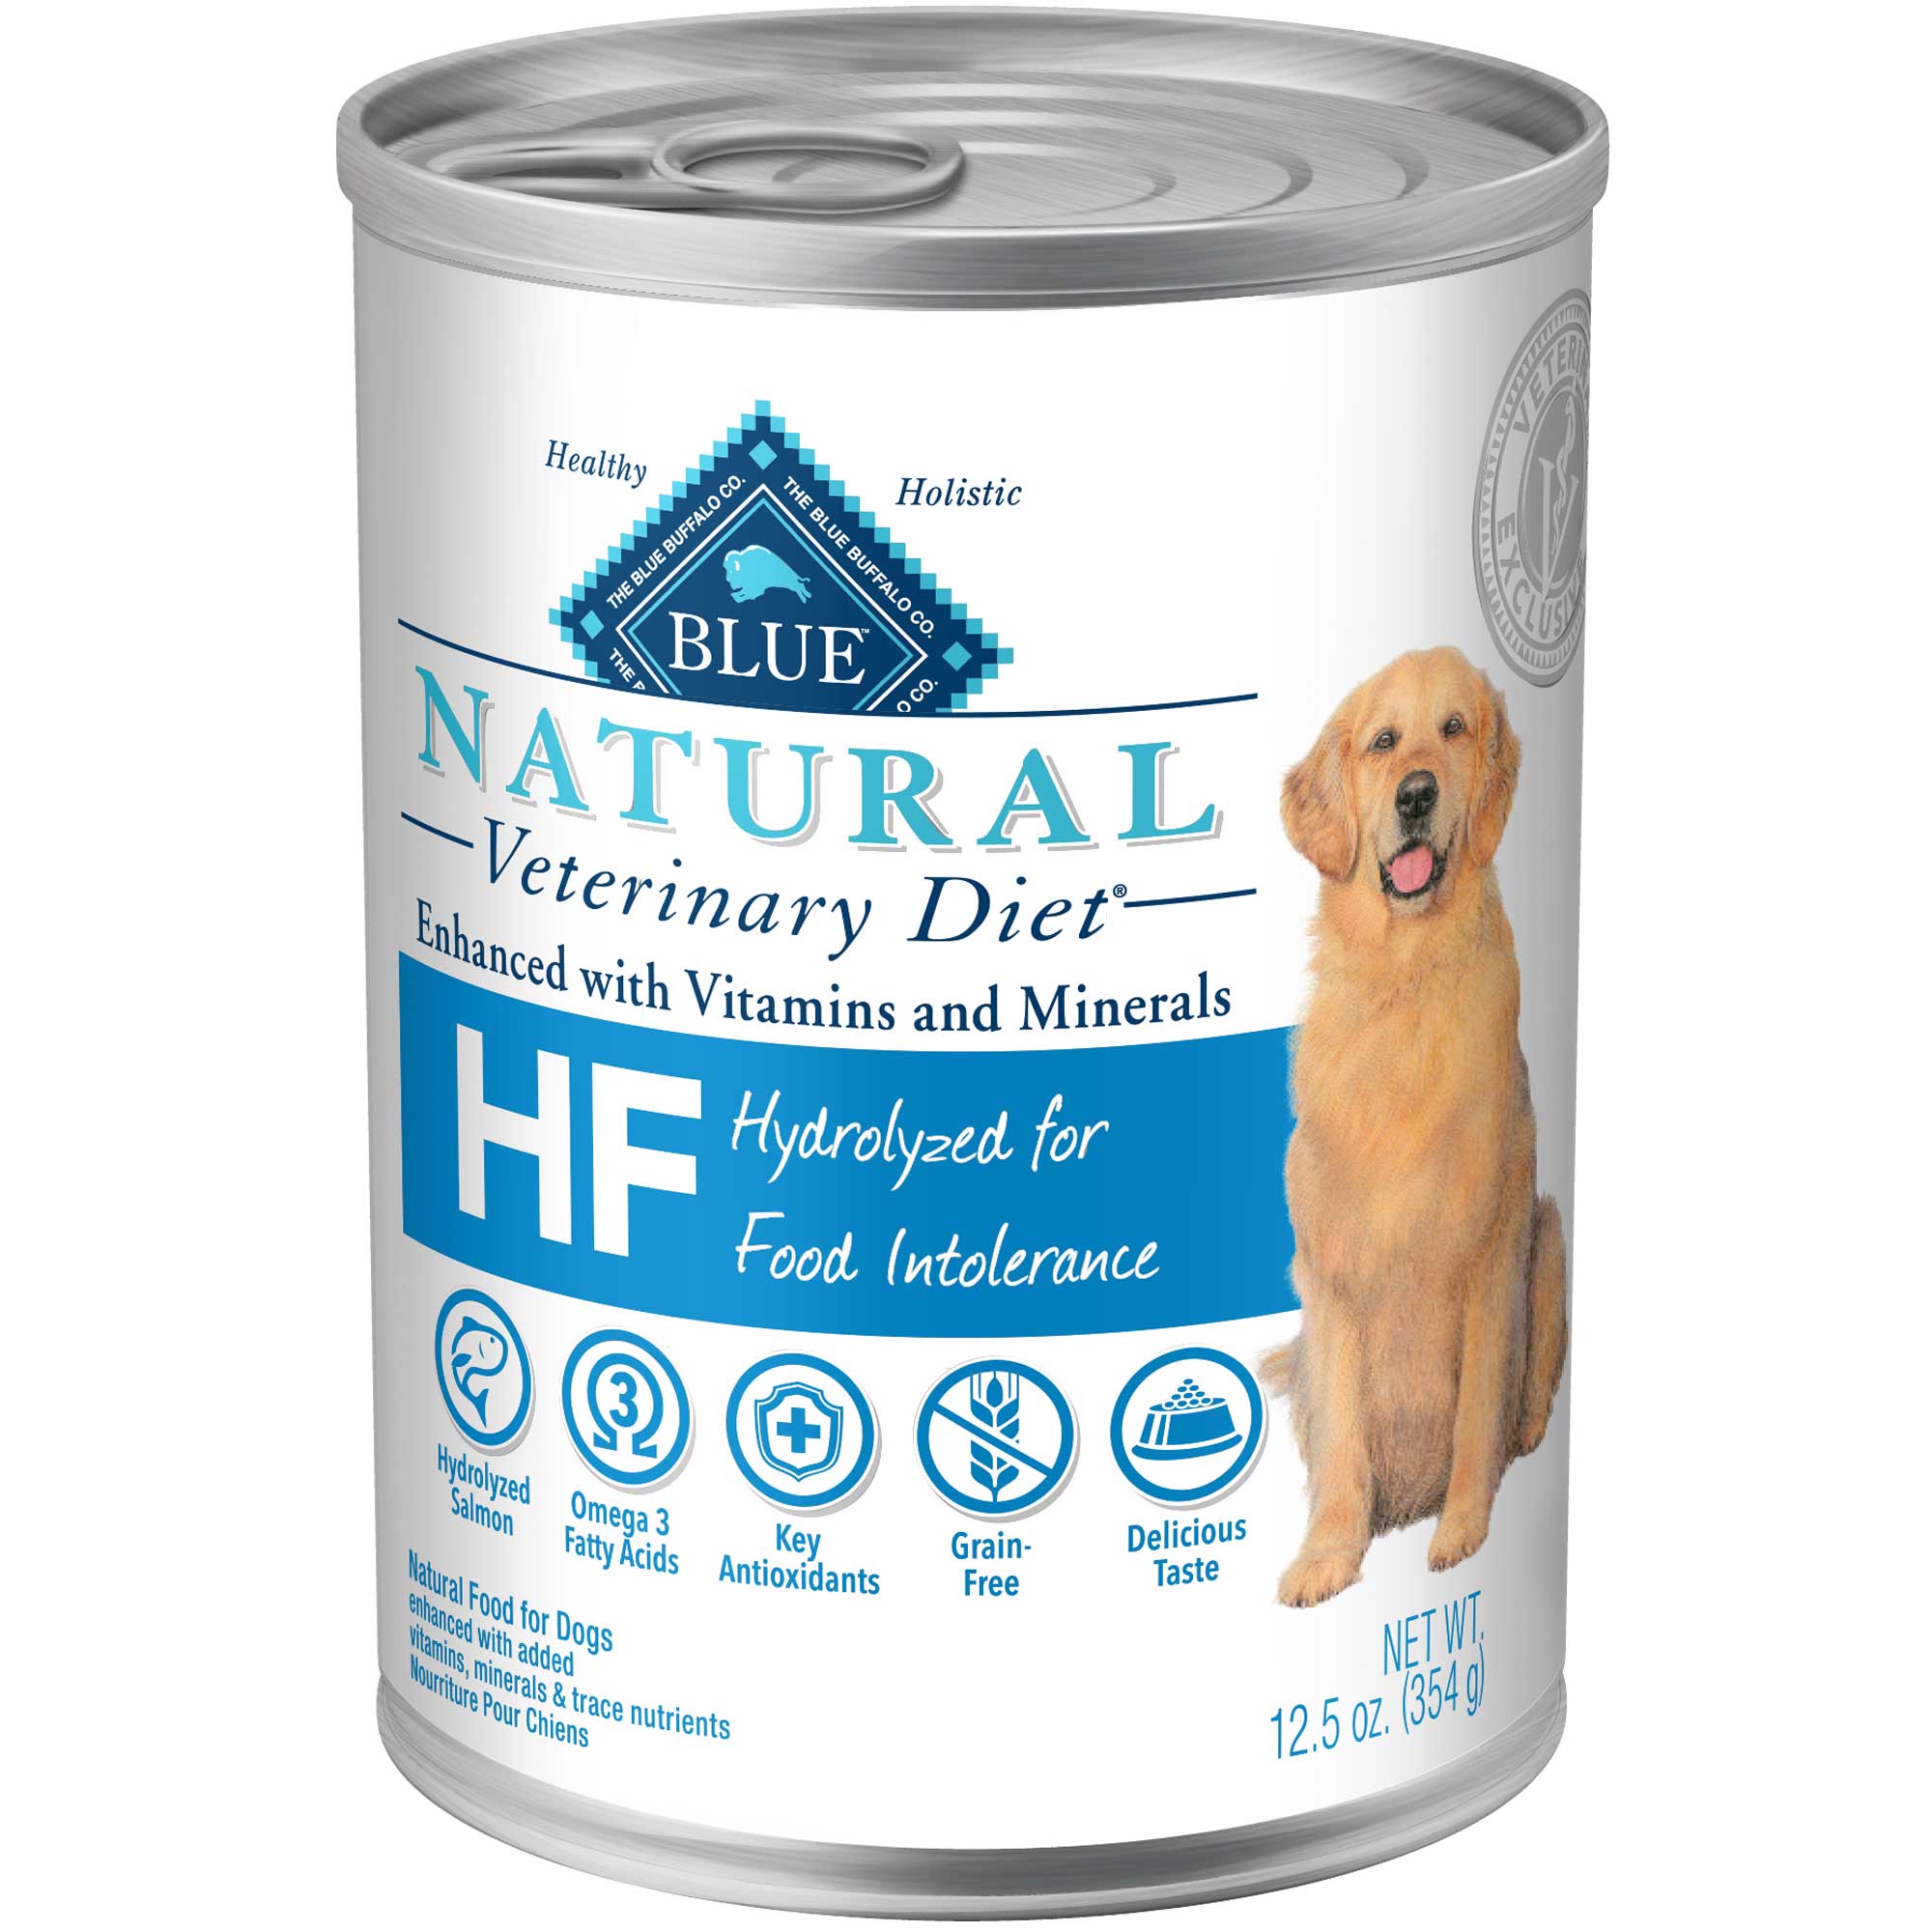 BLUE Natural Veterinary Diet HF Hydrolyzed for Food Intolerance Grain-Free Wet Dog Food Usage